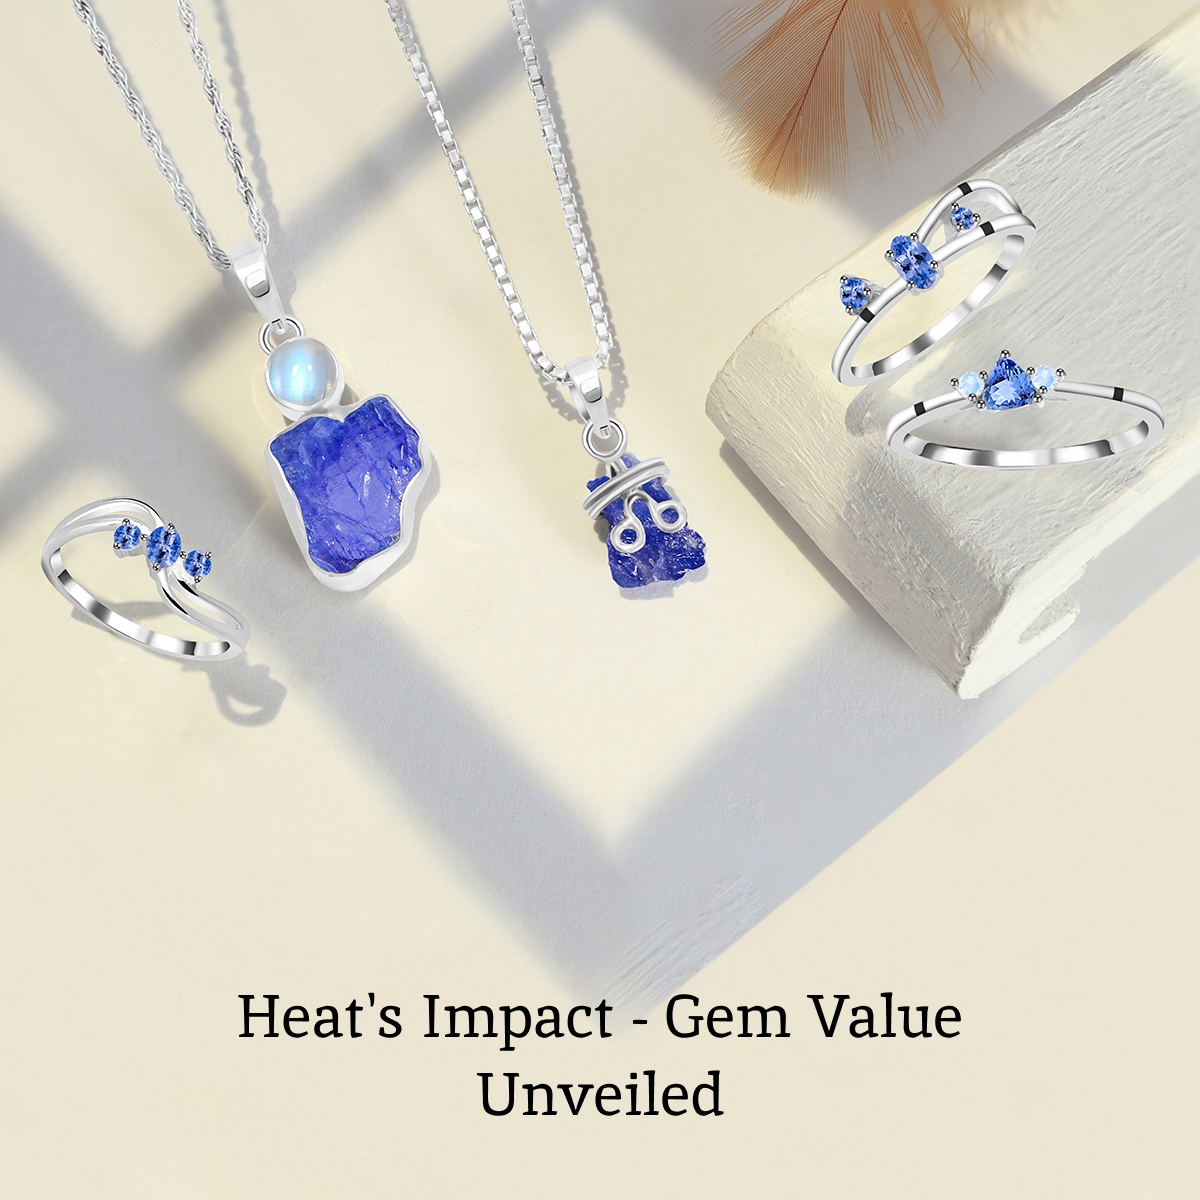 Does Heat Treatment Lower the Value of a Gemstone?